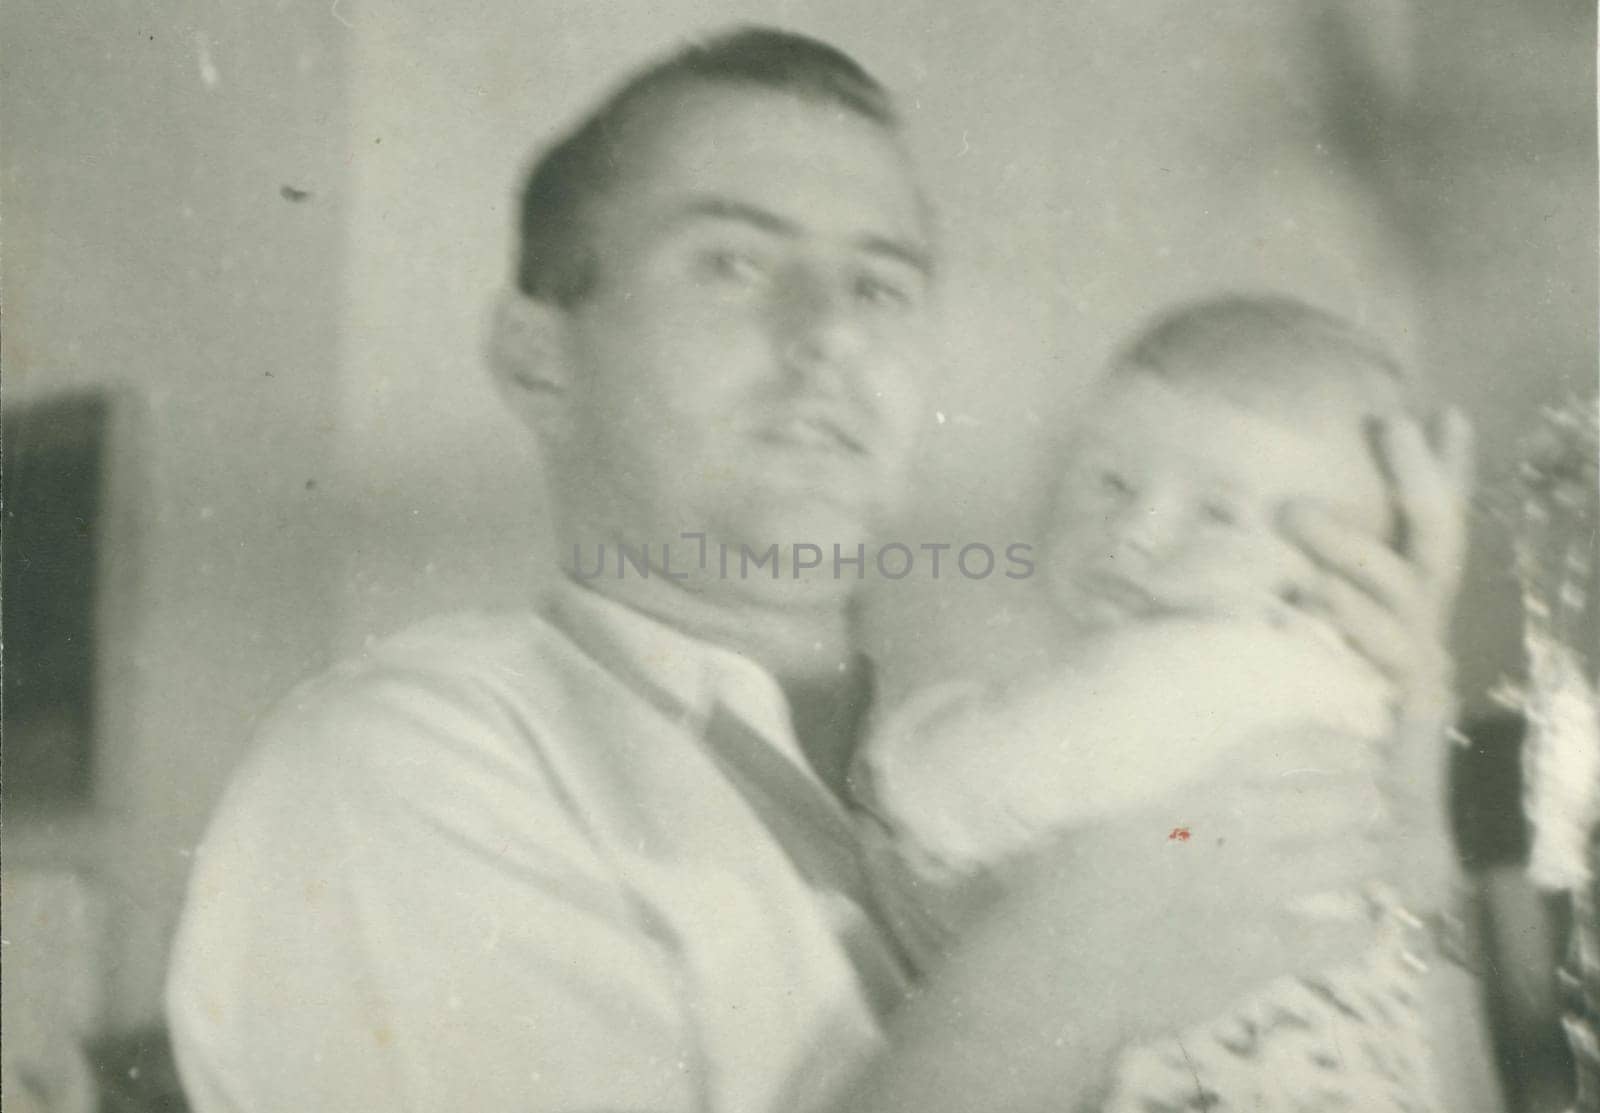 THE CZECHOSLOVAK SOCIALIST REPUBLIC - 1959: Retro photo shows newborn baby and father. Vintage black and white photography. Note: blurriness, better at smaller sizes.